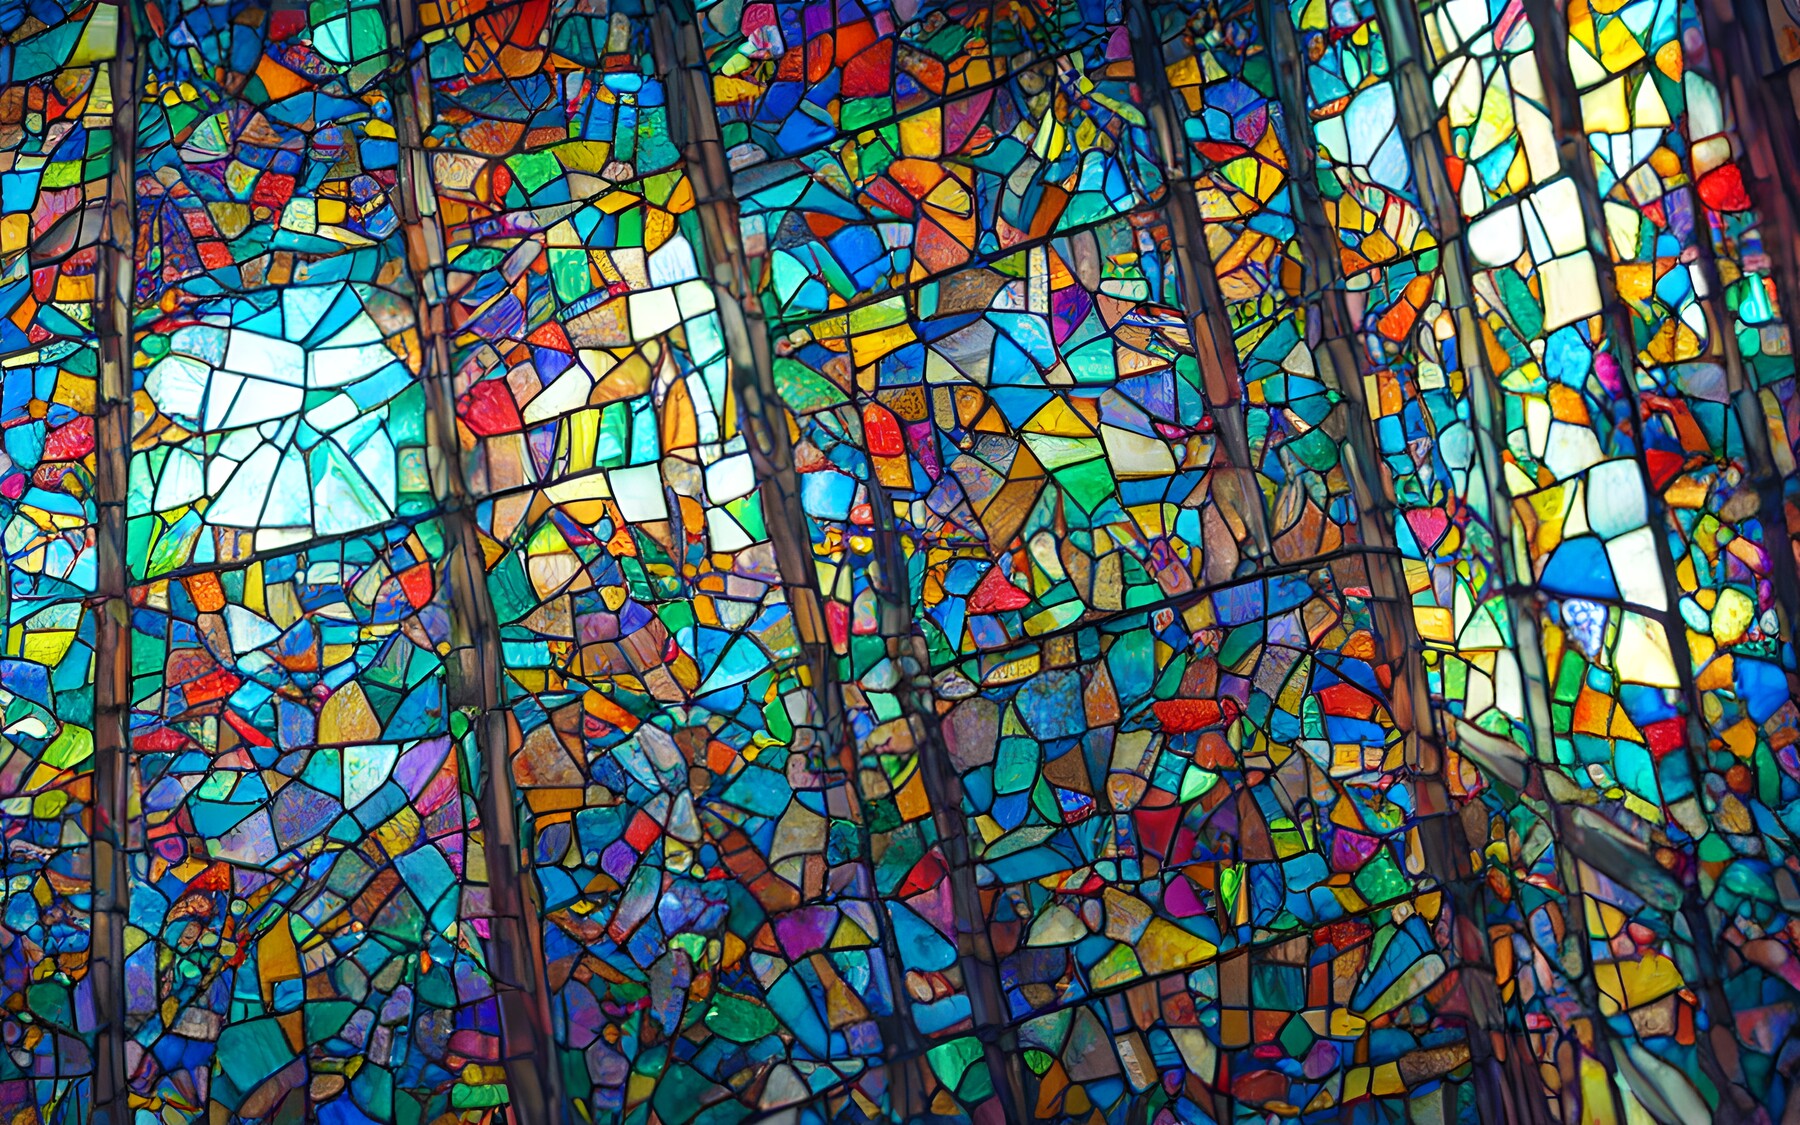 Stained glass window, colorful mosaic illustration